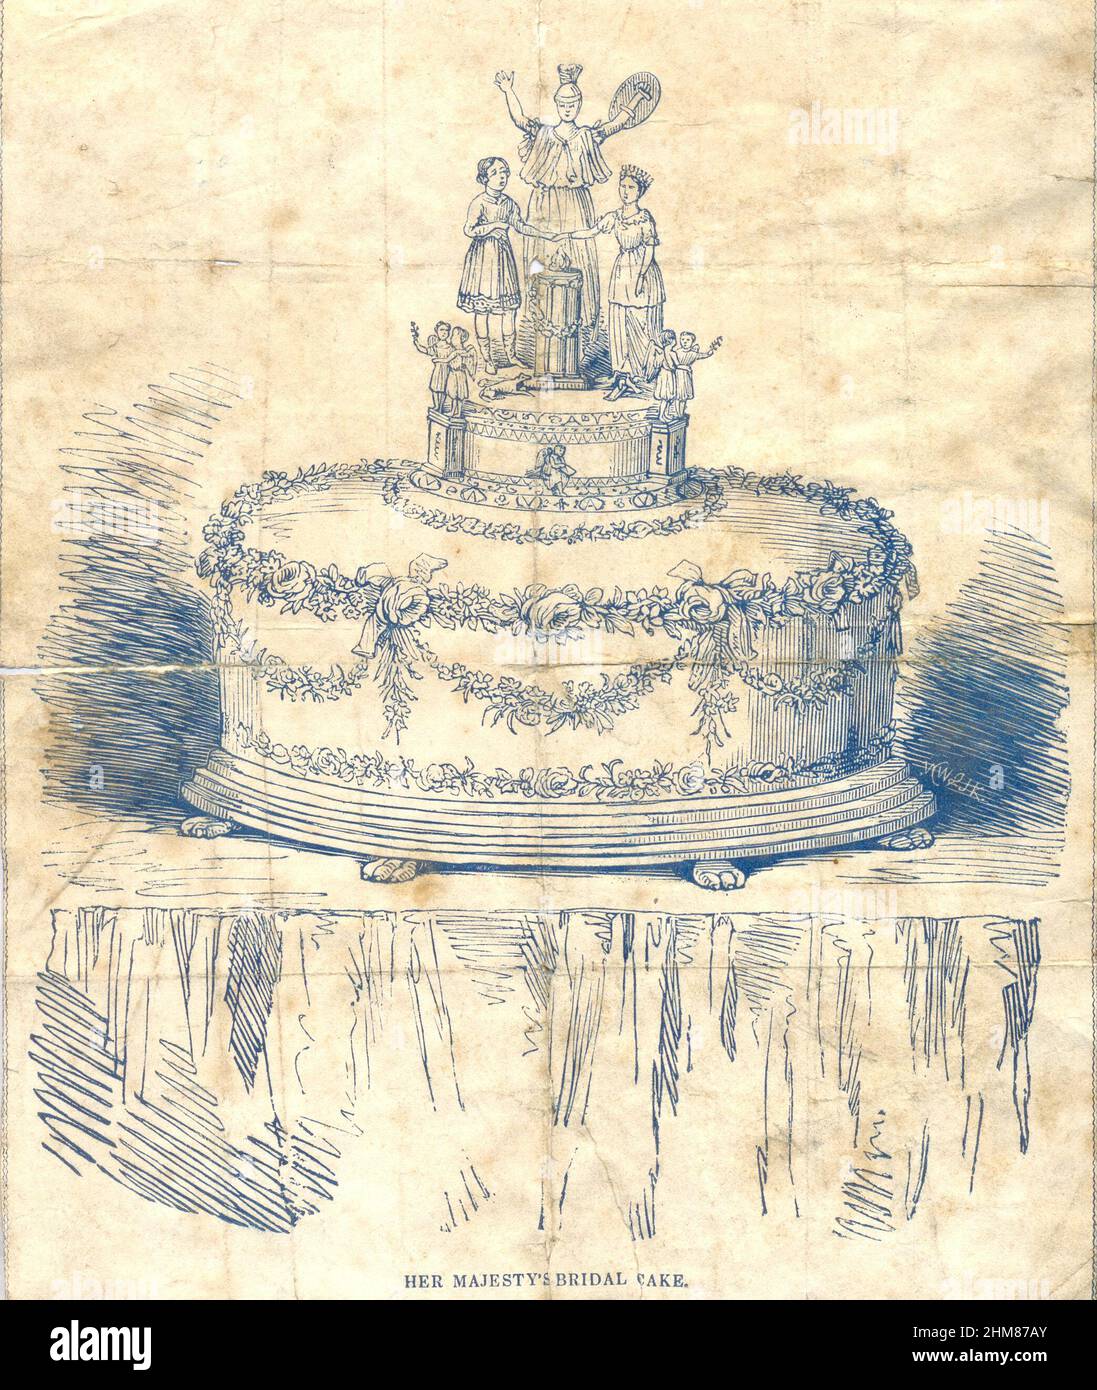 Design on paper bag showing top tier of Queen Victoria's wedding cake  10 February 1840 Stock Photo